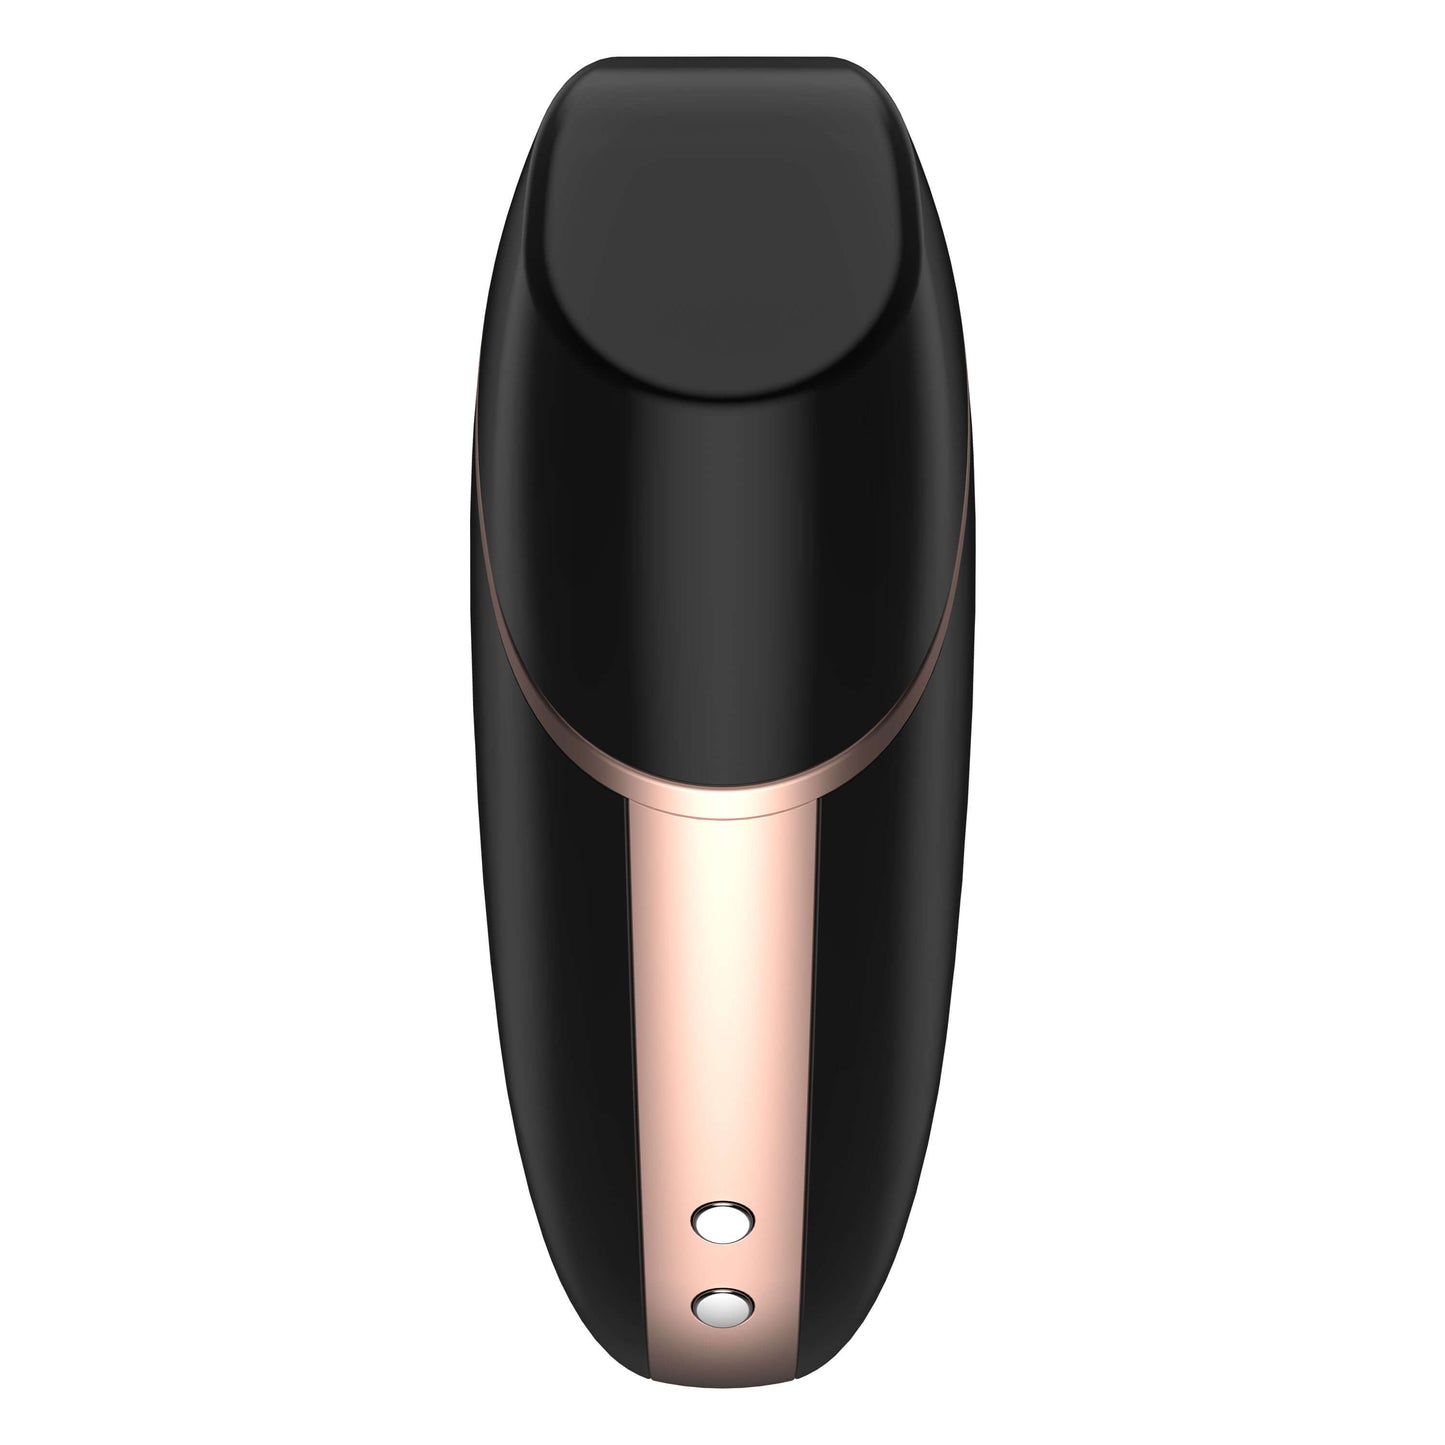 Satisfyer Love Triangle black - by The Bigger O an online sex toy shop. We ship to USA, Canada and the UK.